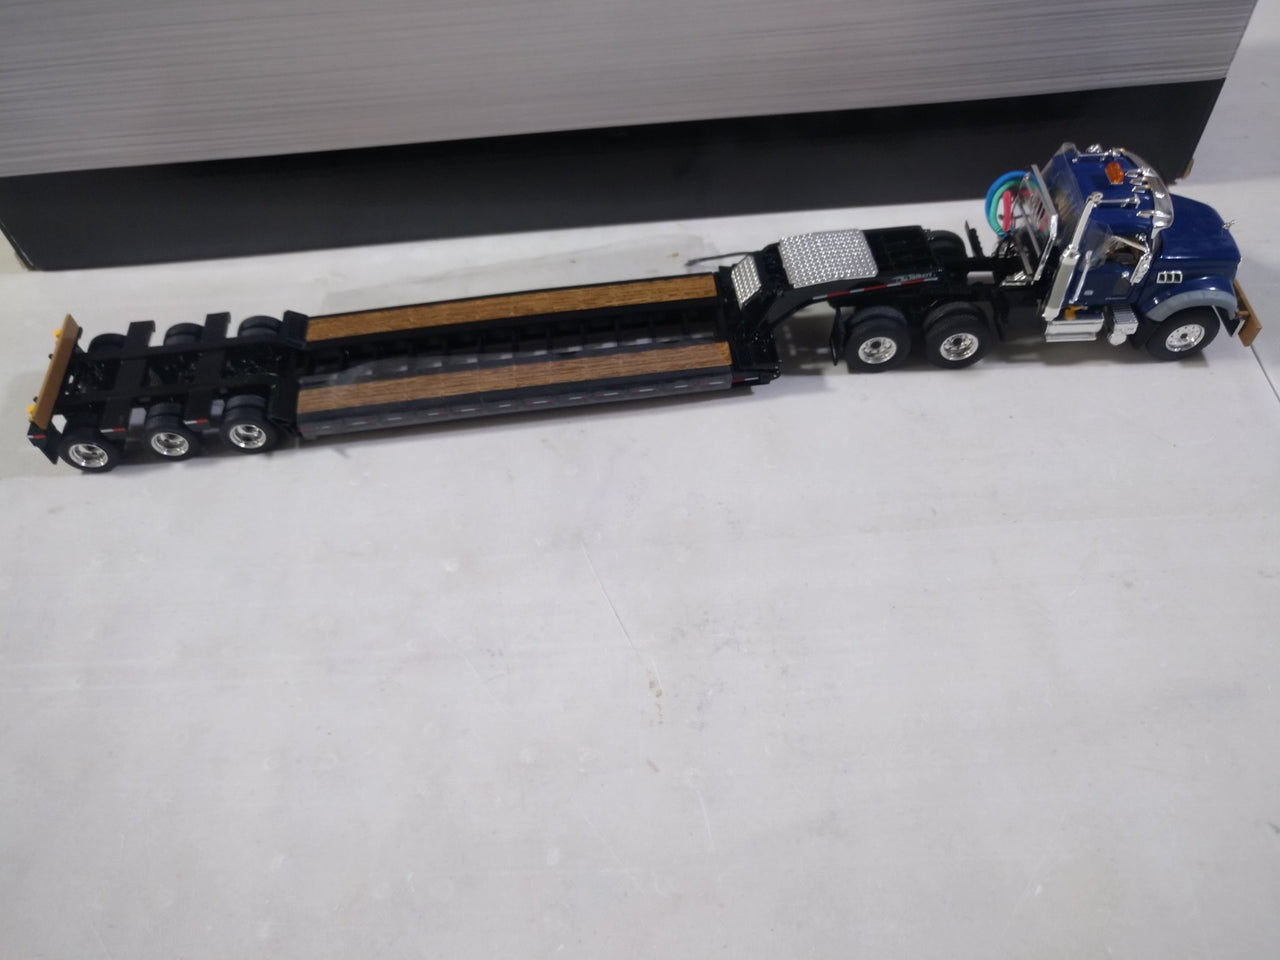 50-3458 Mack Granite MP Day Cab Low Bed Blue 1:50 Scale